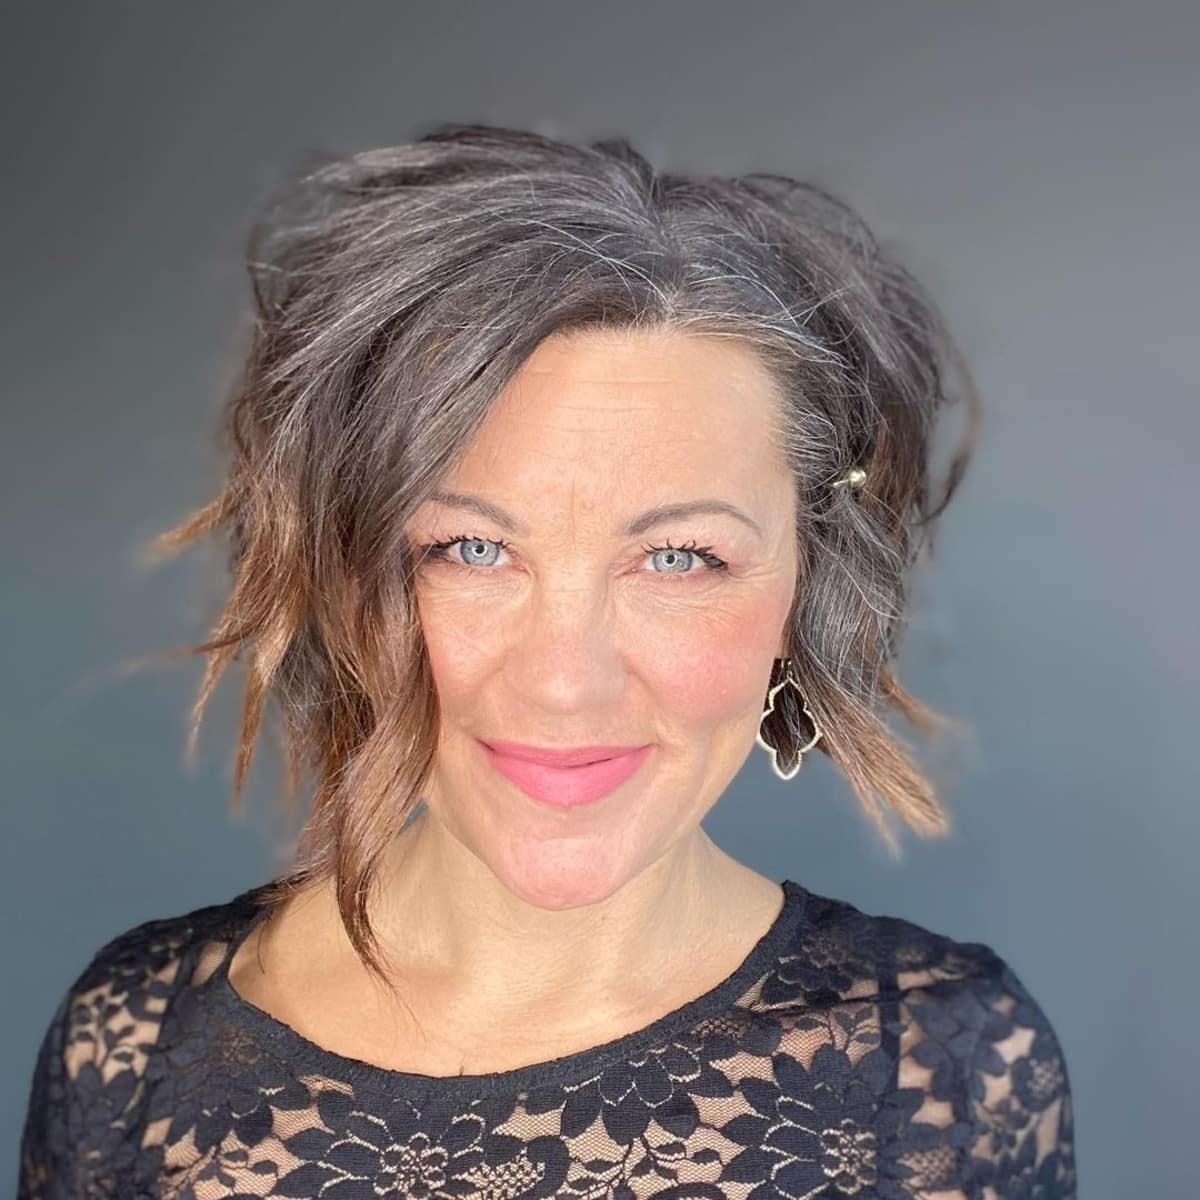 18 Youthful-Looking Hairstyles for Women Over 60 with Grey Hair